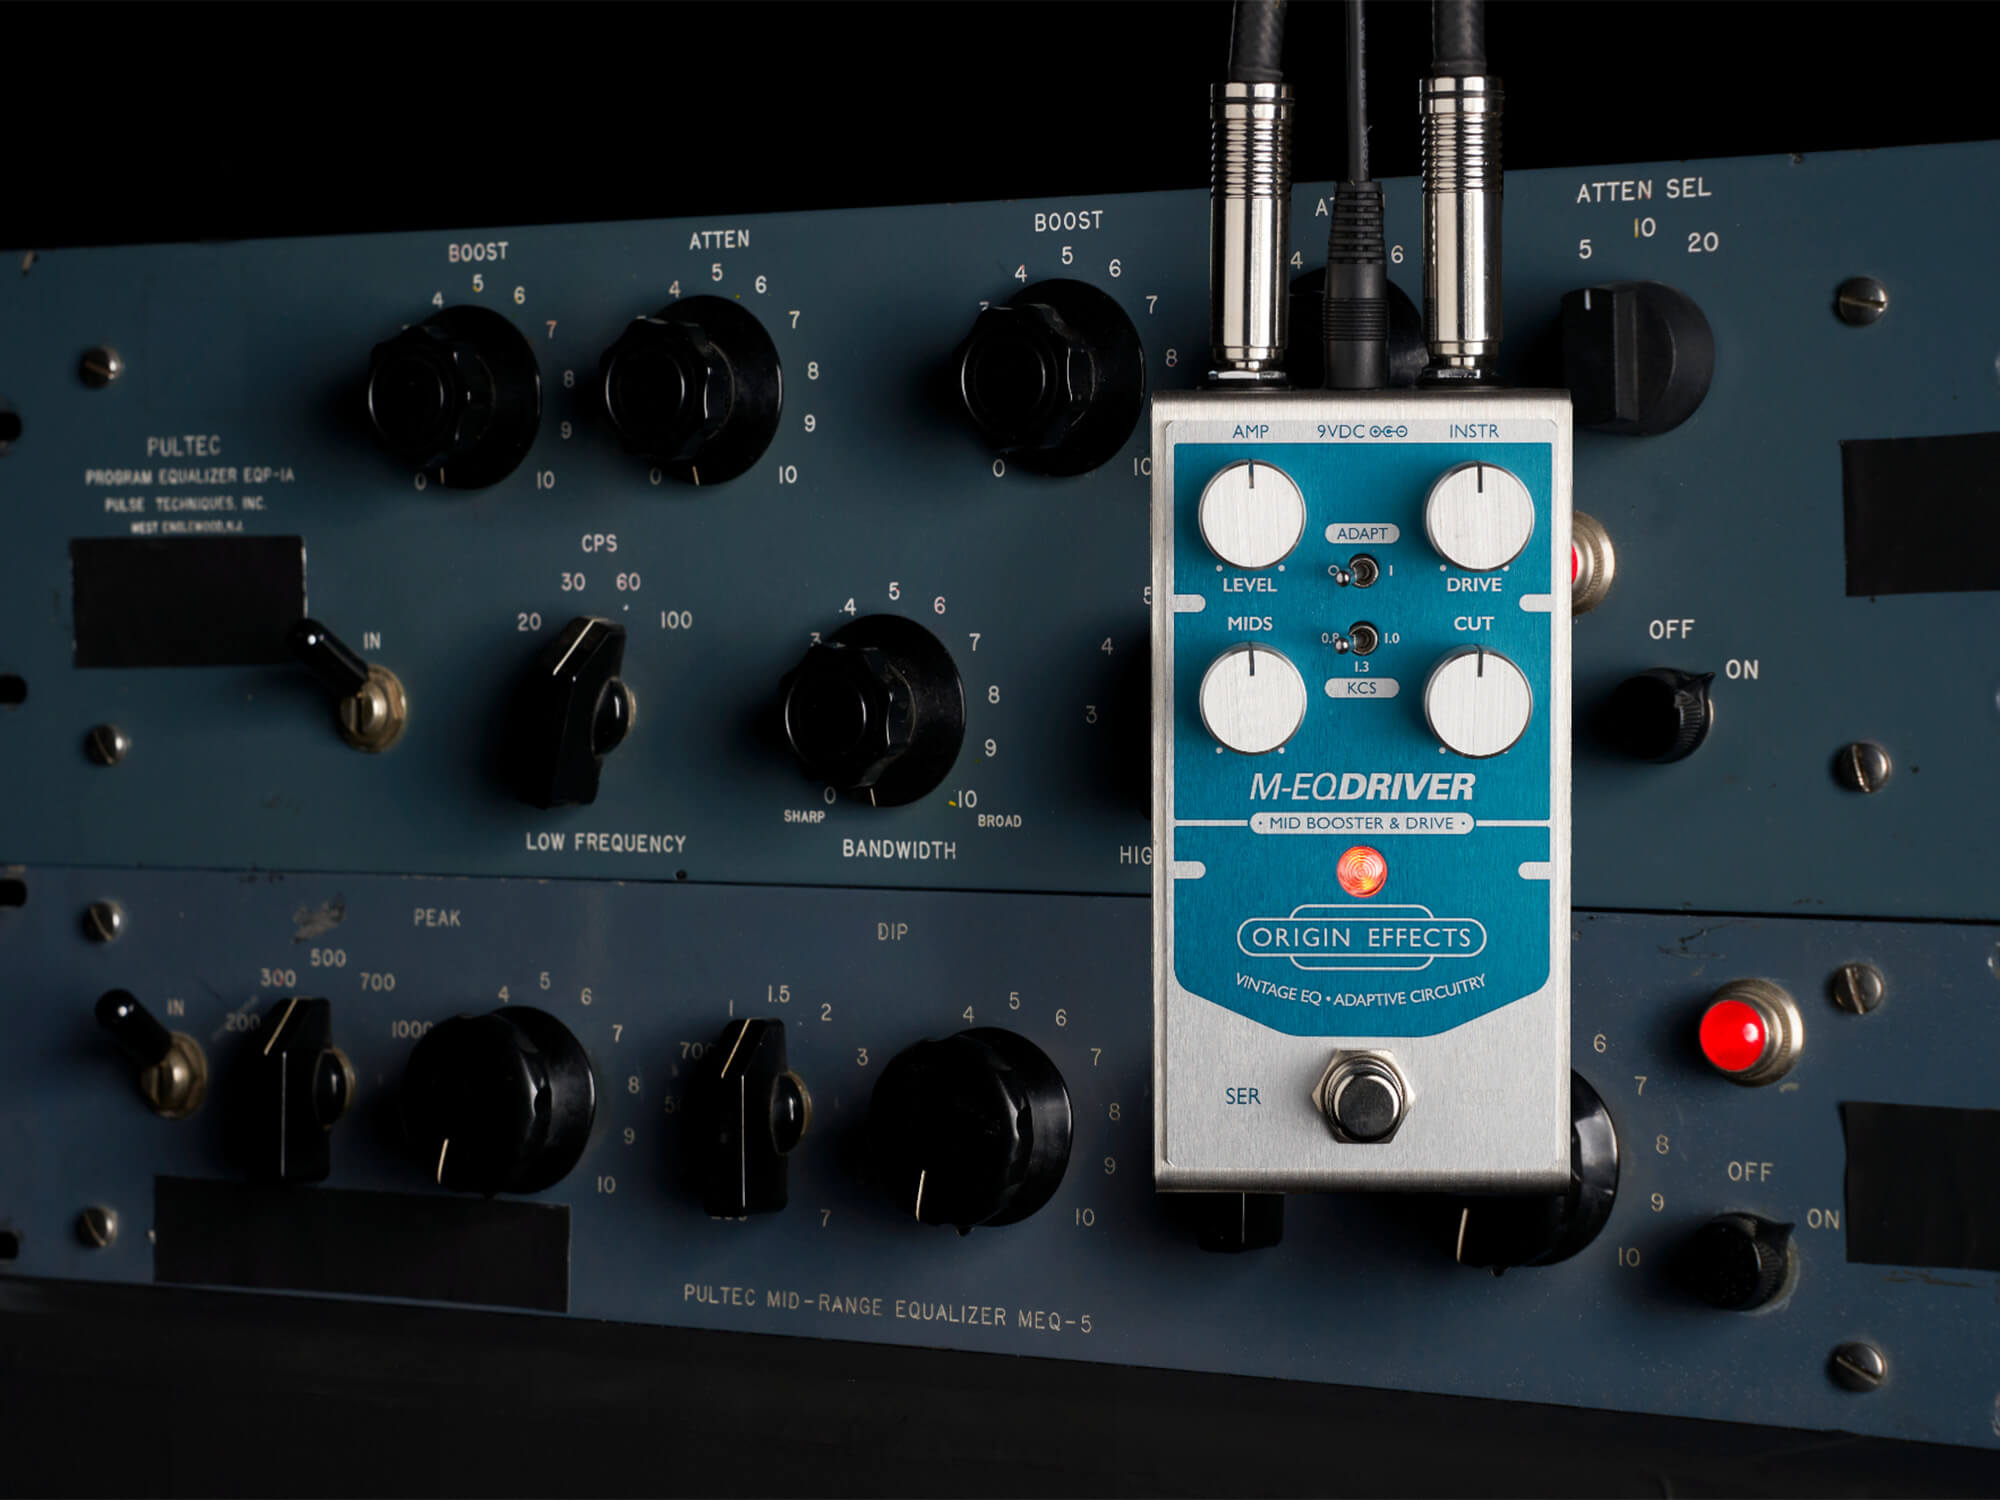 Origin Effects launched M-EQ DRIVER based on 1950s Pultec EQ